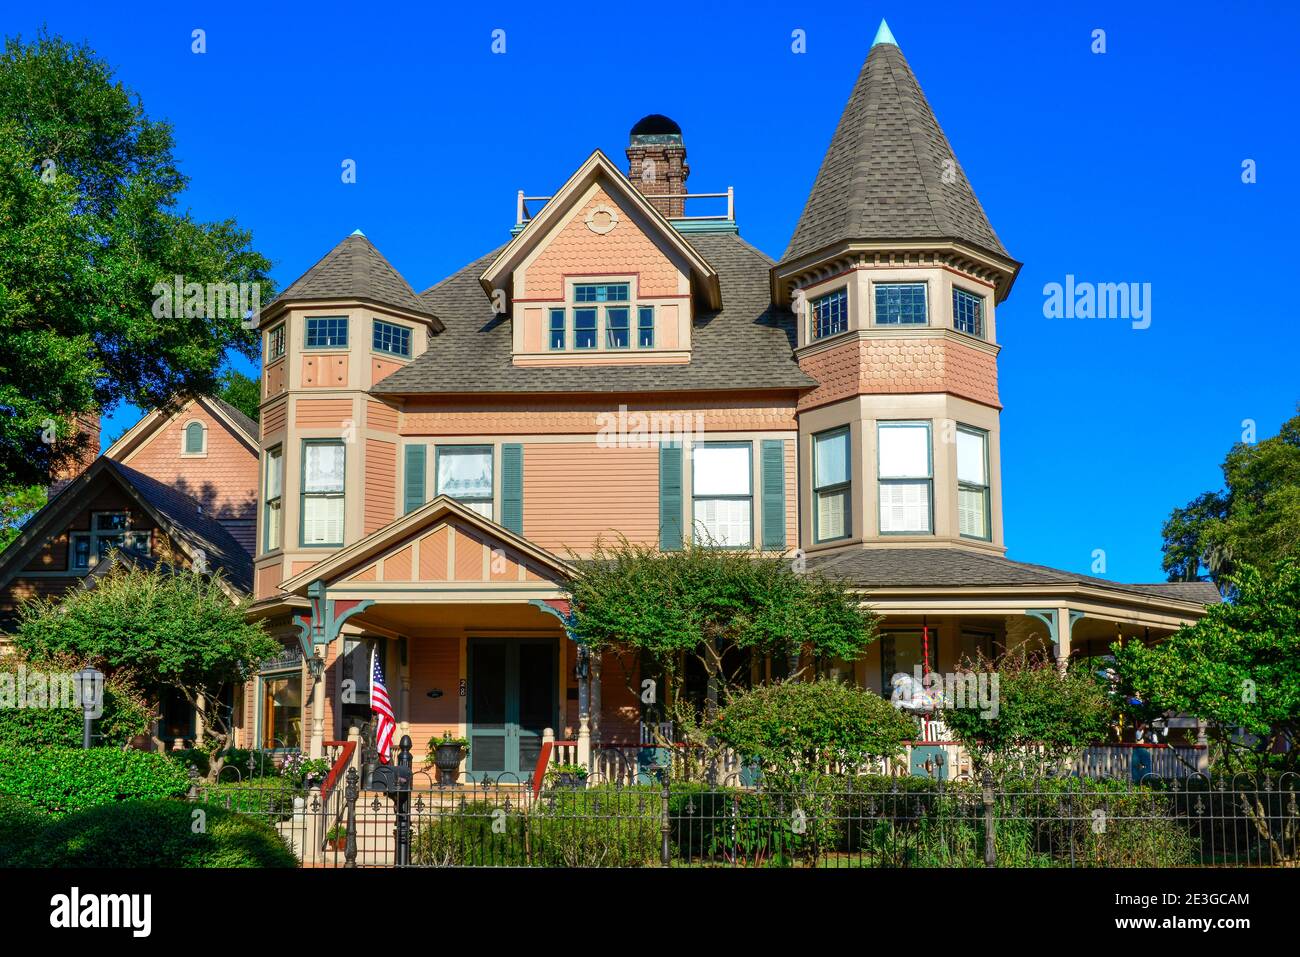 The historic Bailey House, is a Victorian Queen Anne style with a display of antique carousel horses on front porch, in Fernandina Beach, FL on Amelia Stock Photo